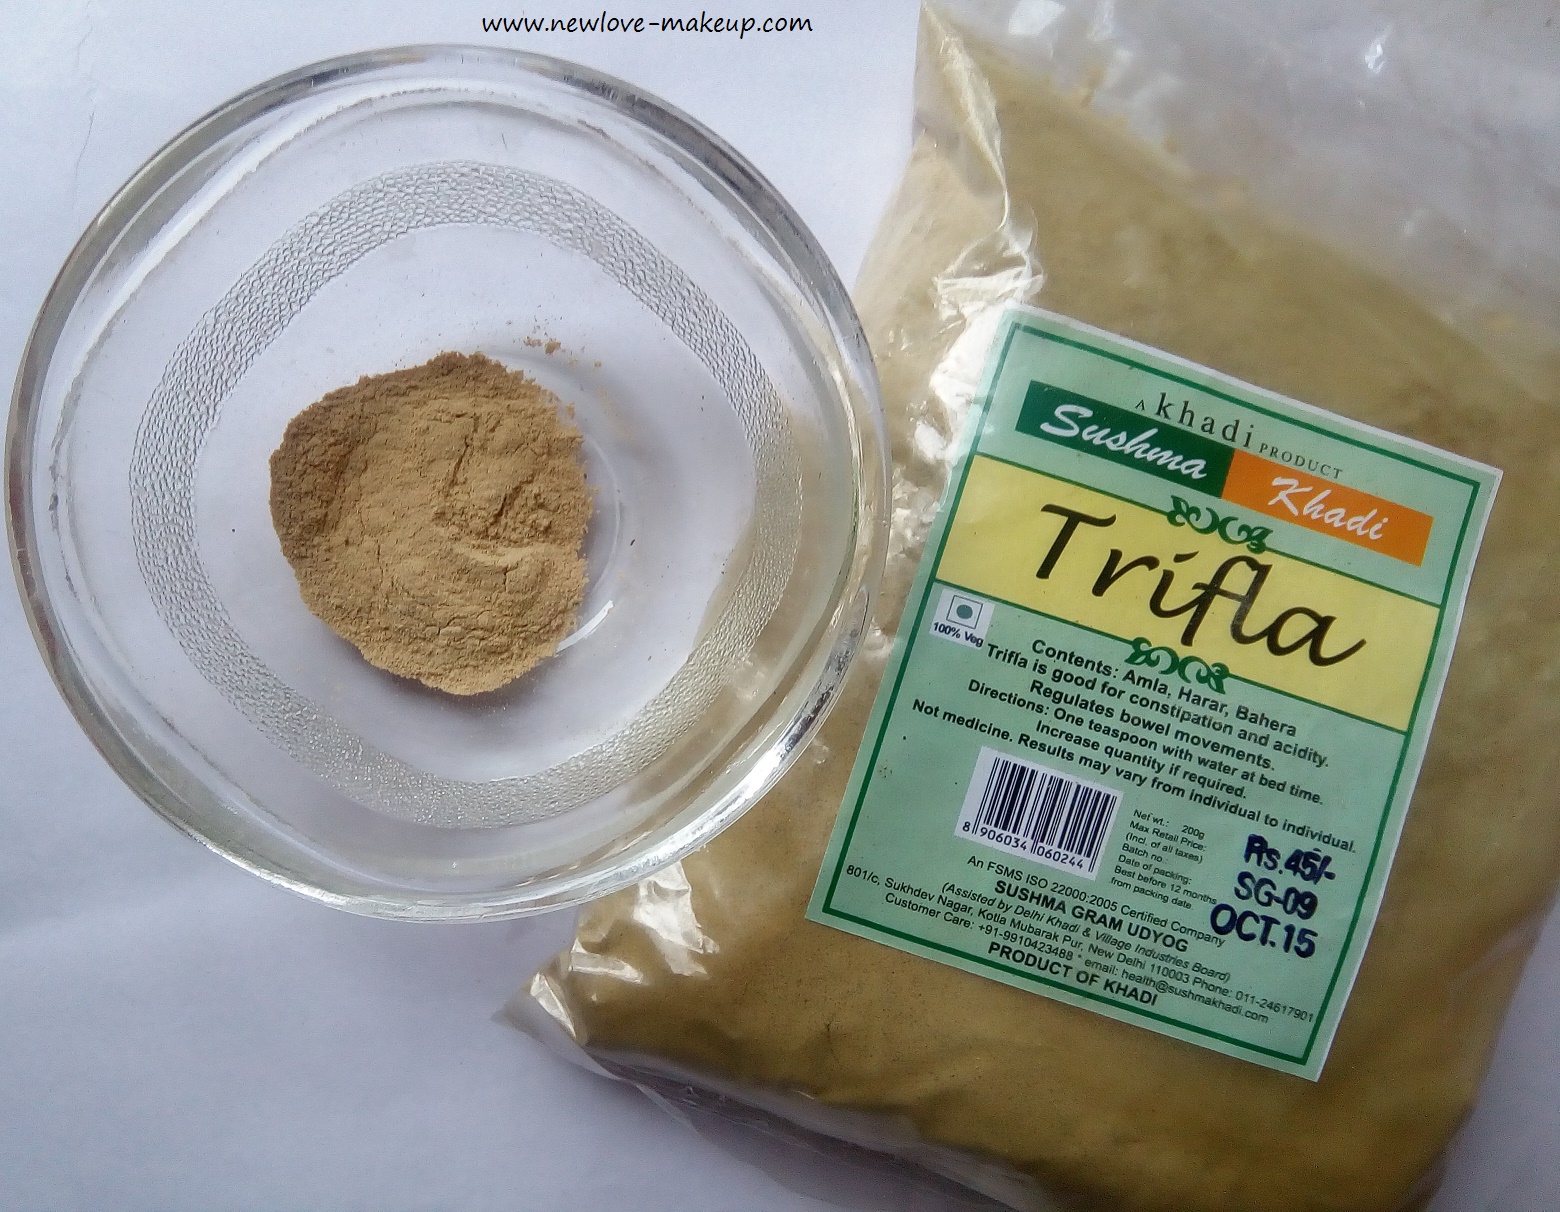 Khadi Trifla Powder Review & How to use for Hair - New Love - Makeup